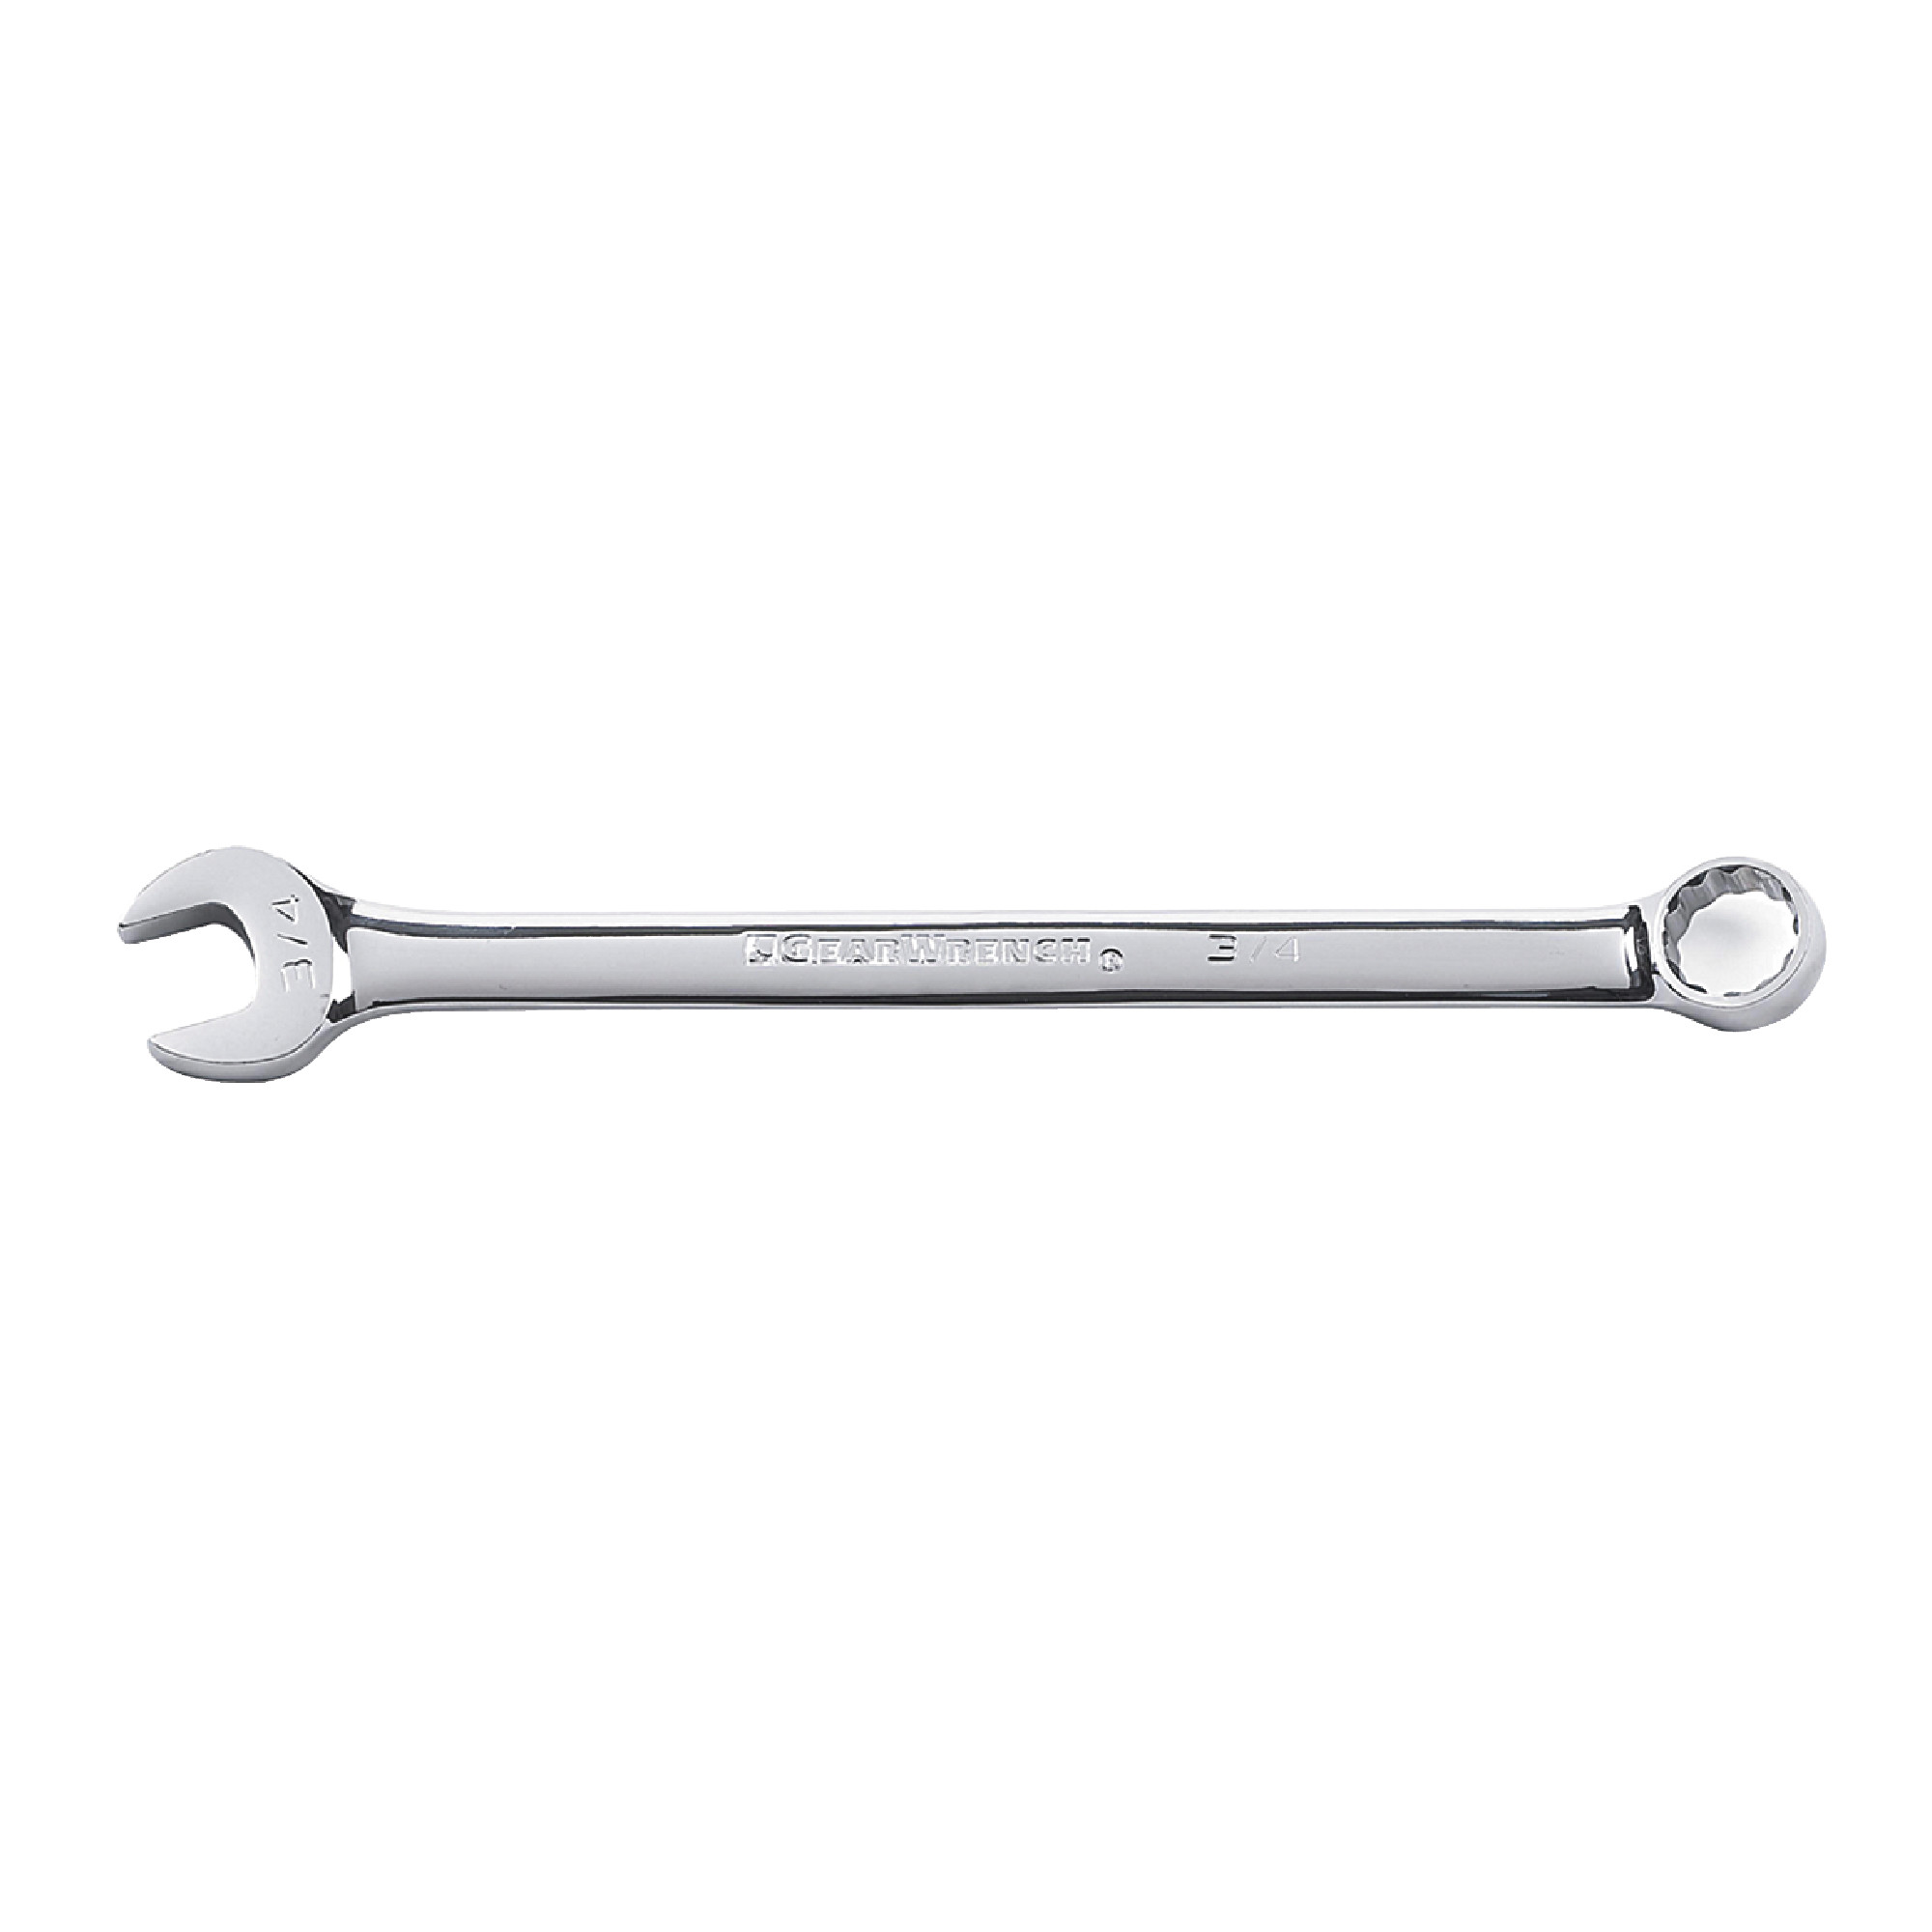 11/16" 12 Point Long Pattern Combination Wrench